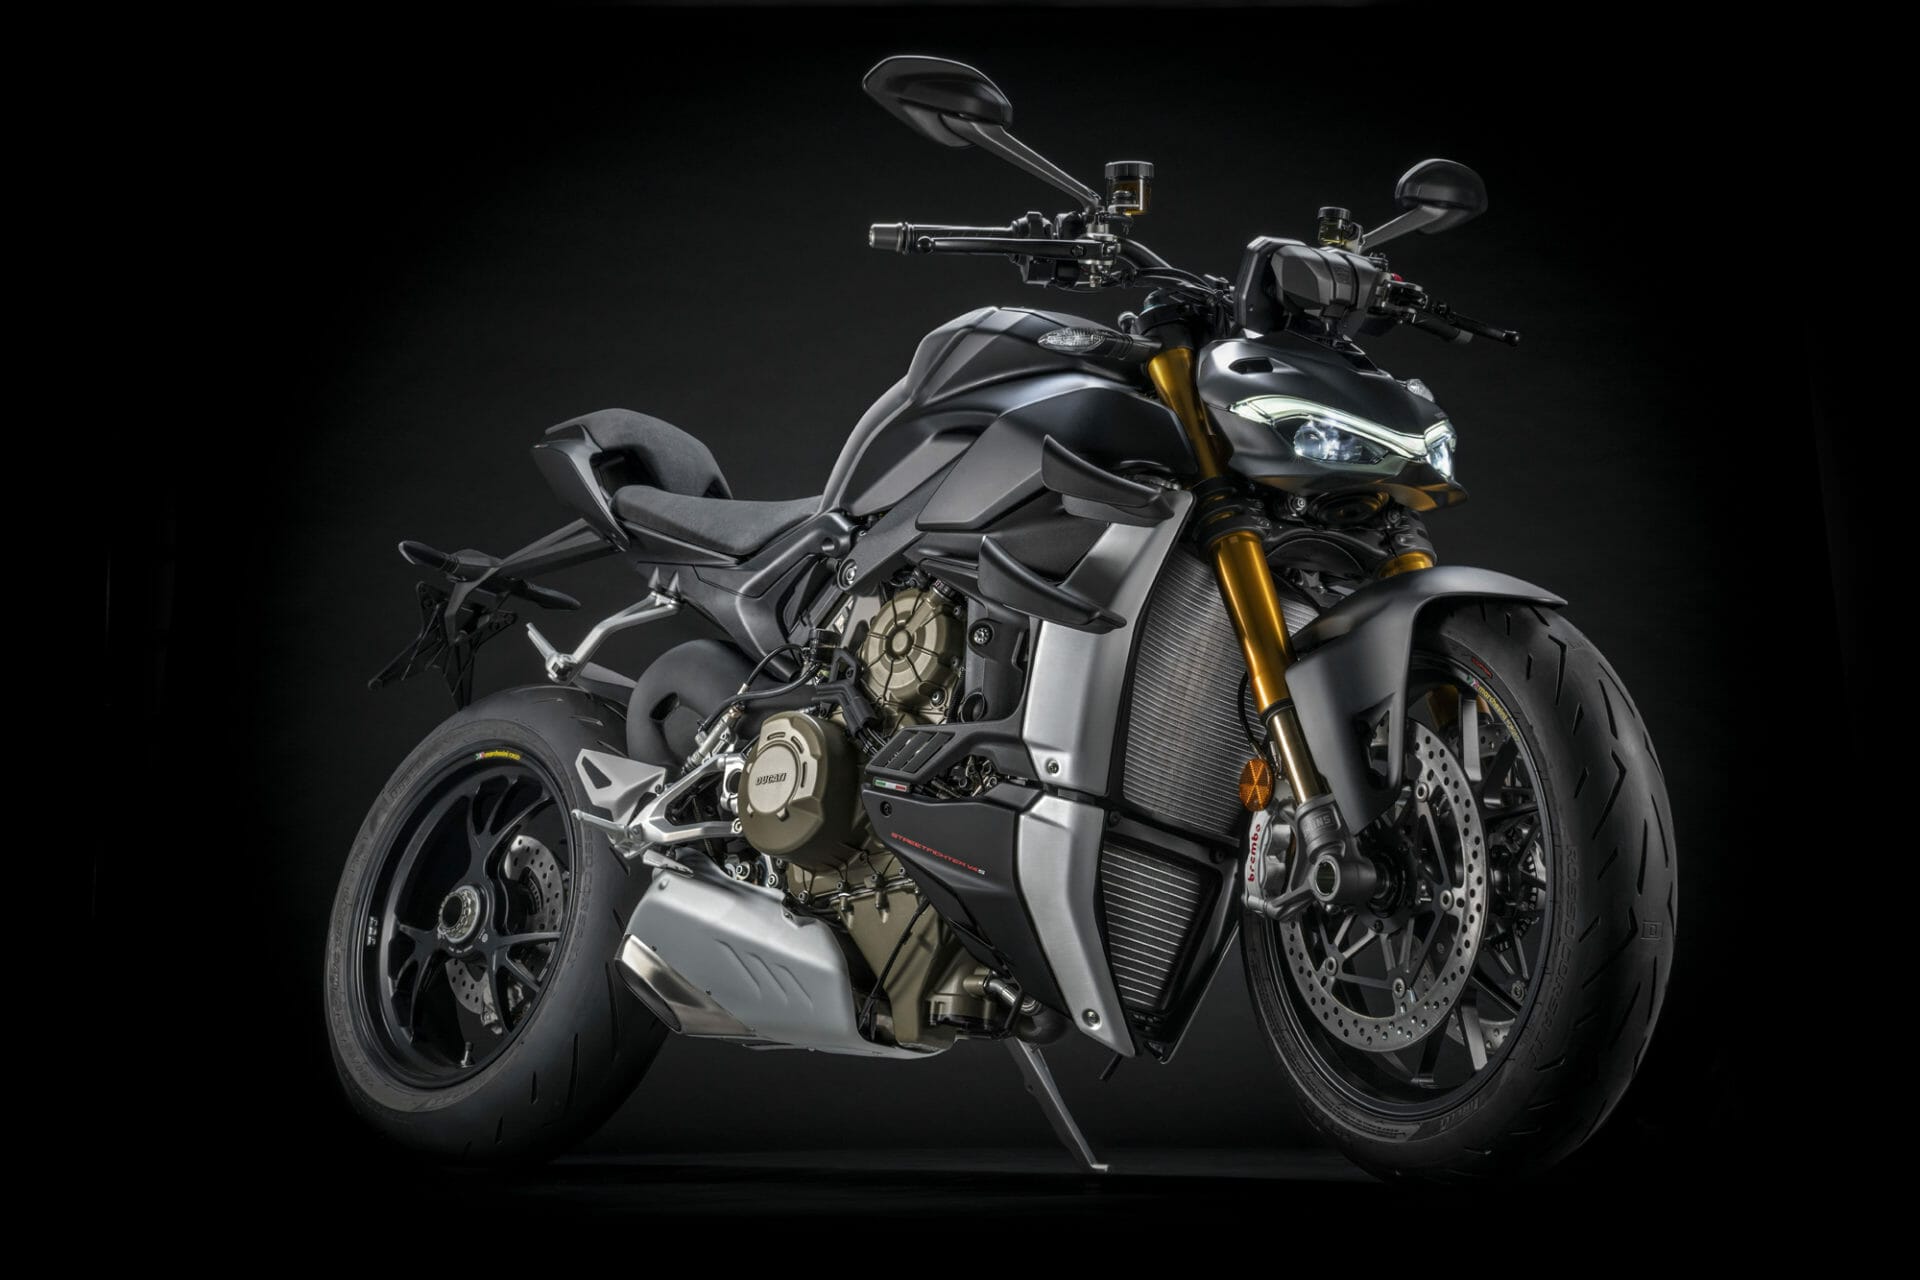 Ducati Streetfighter V4 for 2021 in friendly black
- also in the App MOTORCYCLE NEWS